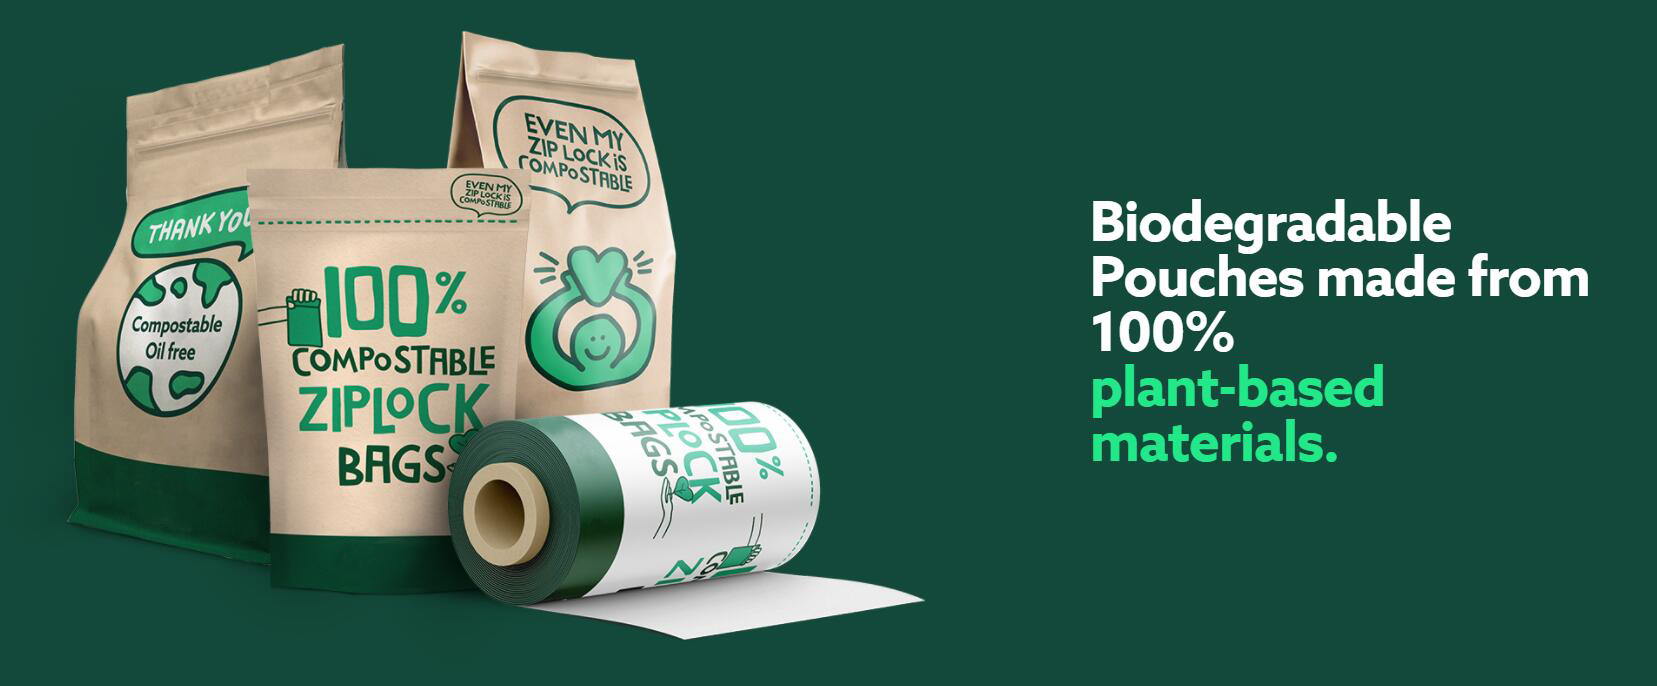 World's Trend of Food Packaging towards Compostable Pouch